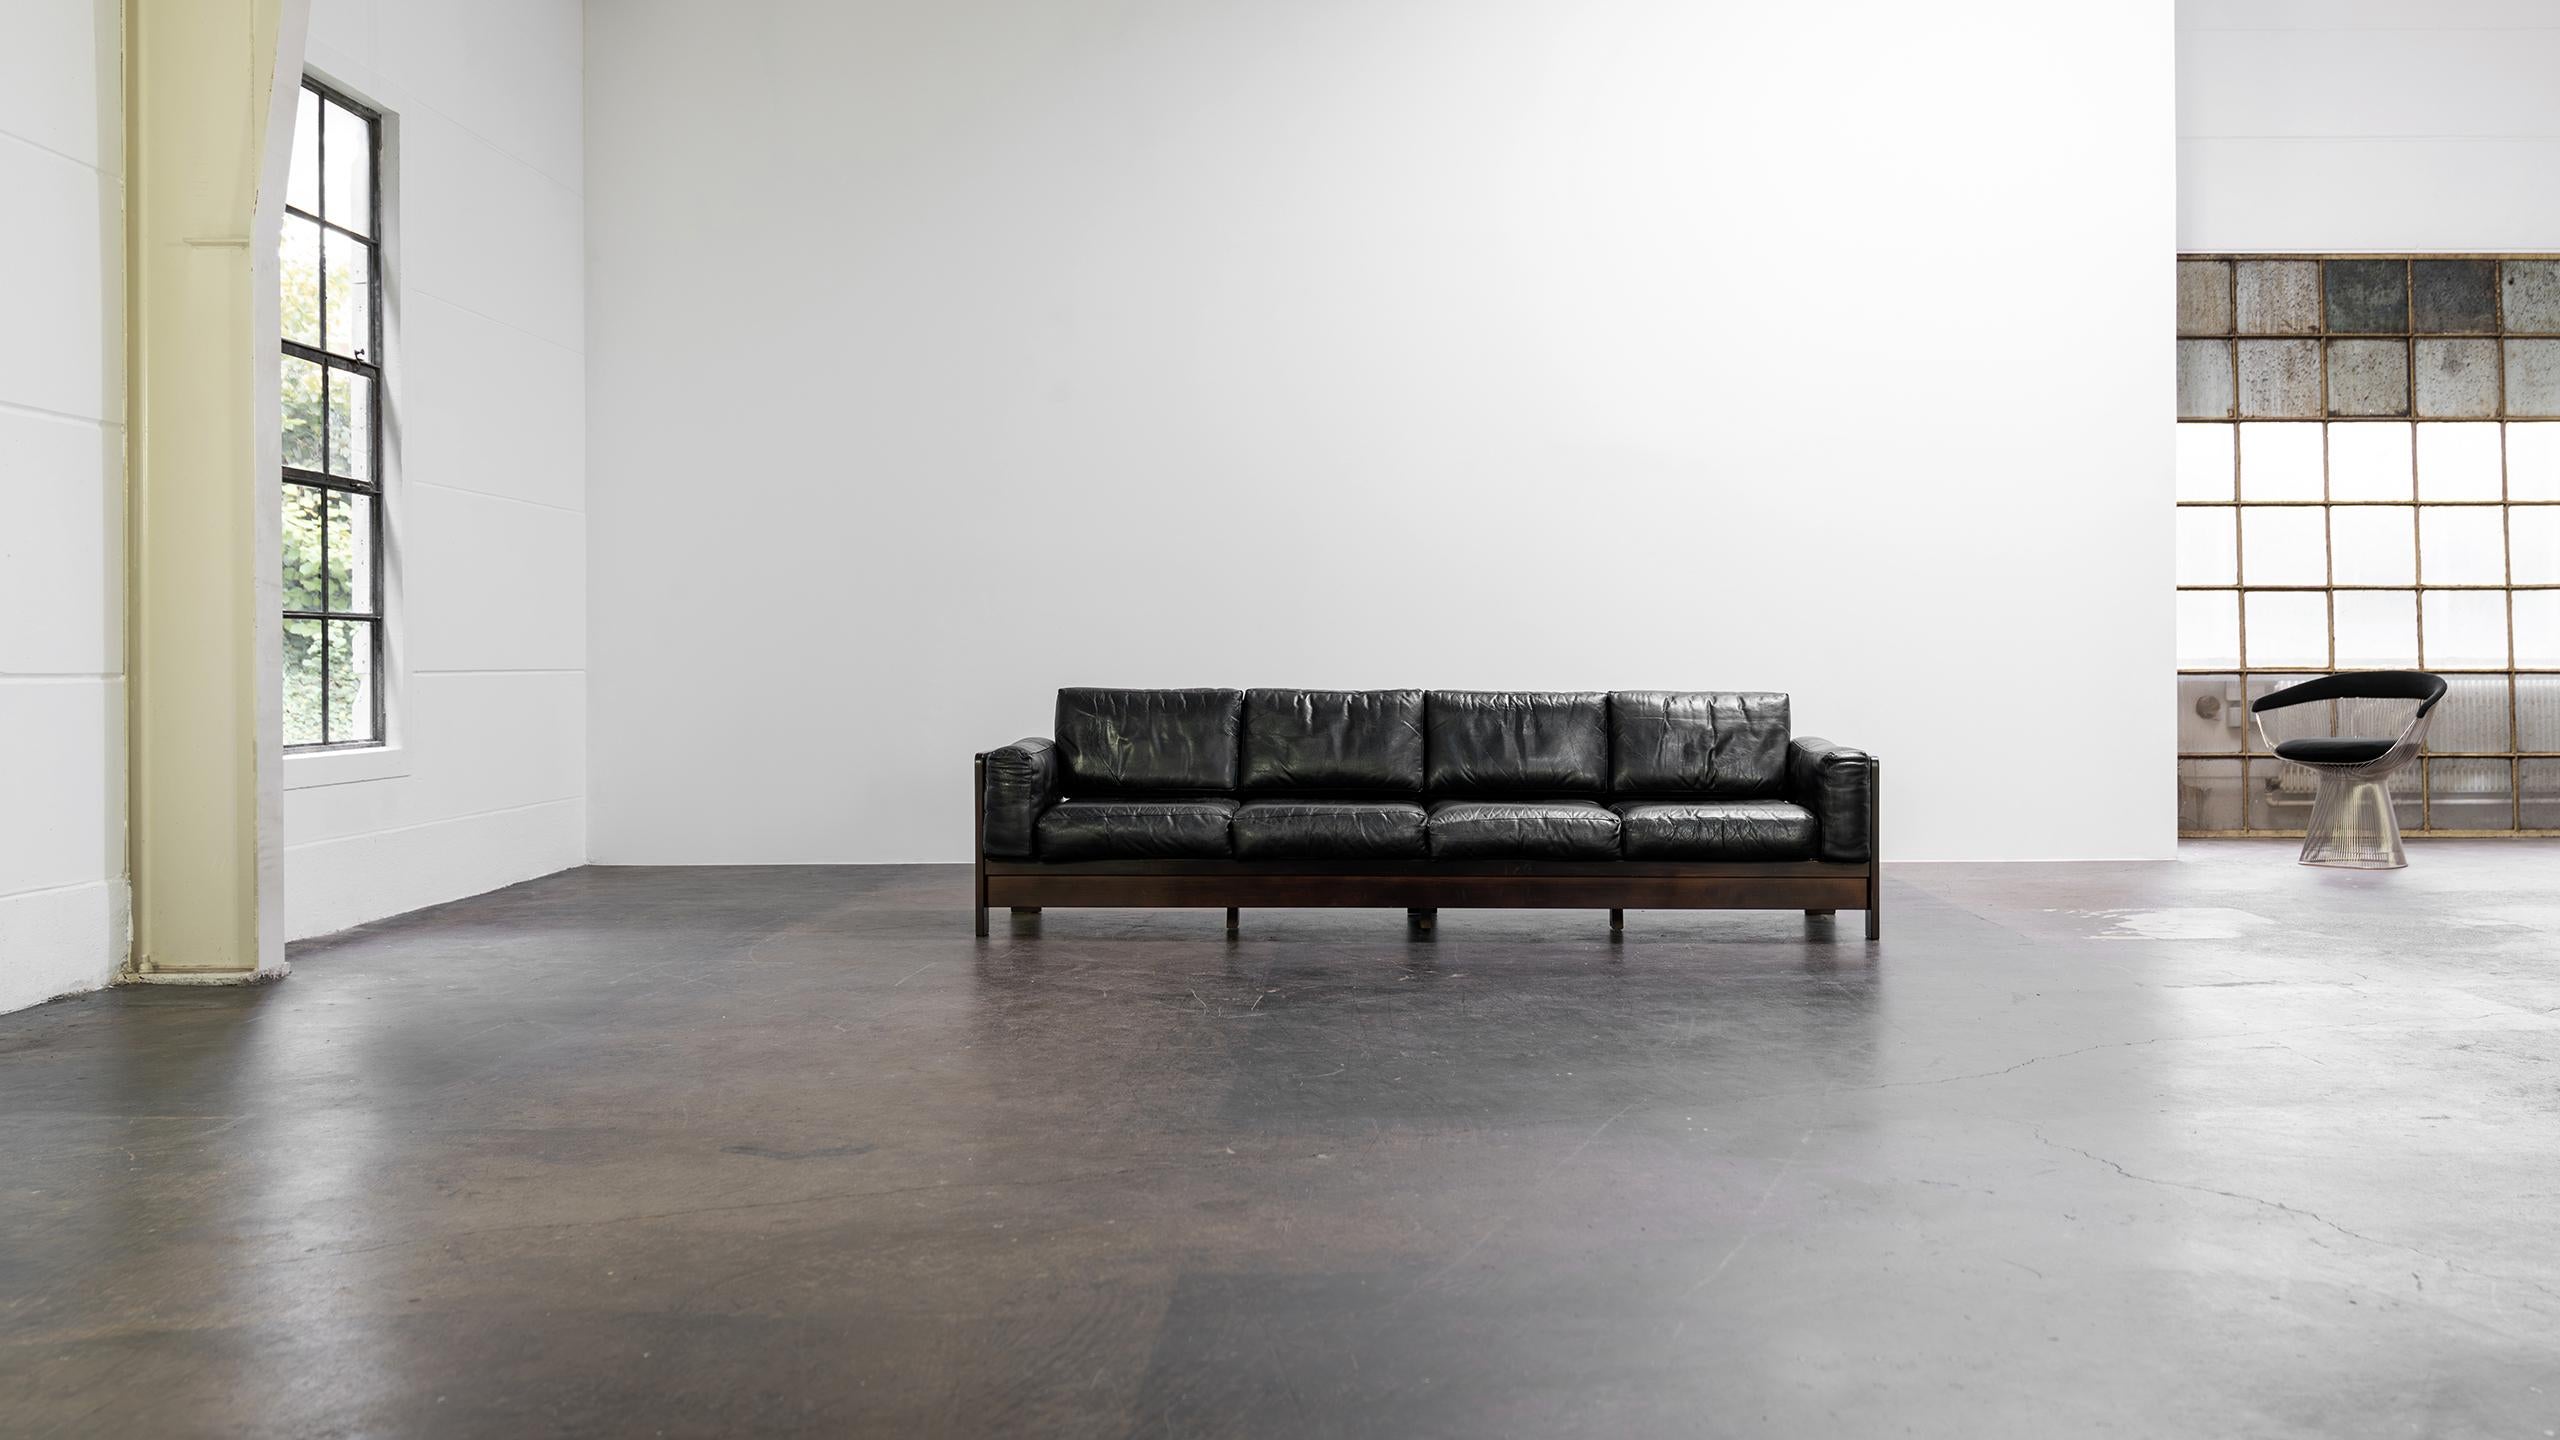 Tobia Scarpa for Knoll International - extralarge 4 seater Bastiano Sofa.
Leather and walnut, made in Italy - manufactured between 1969-1970.

Beautiful and very rare 4-seat Bastiano sofa made with a walnut frame and black leather cushions.
The sofa